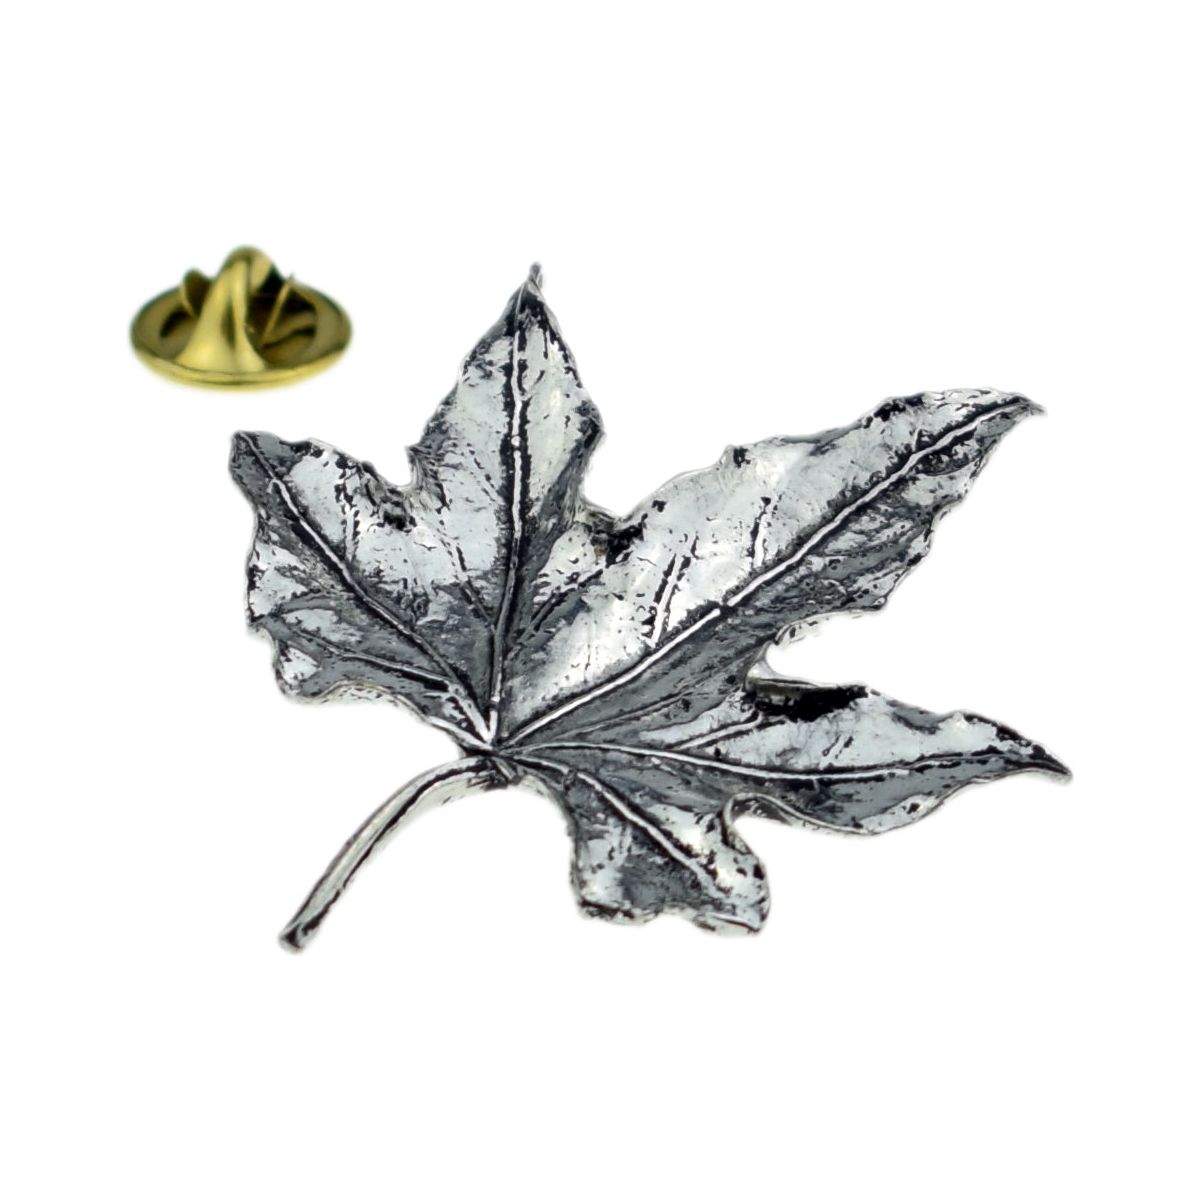 Canadian Maple Leaf English Pewter Lapel Pin Badge - Ashton and Finch